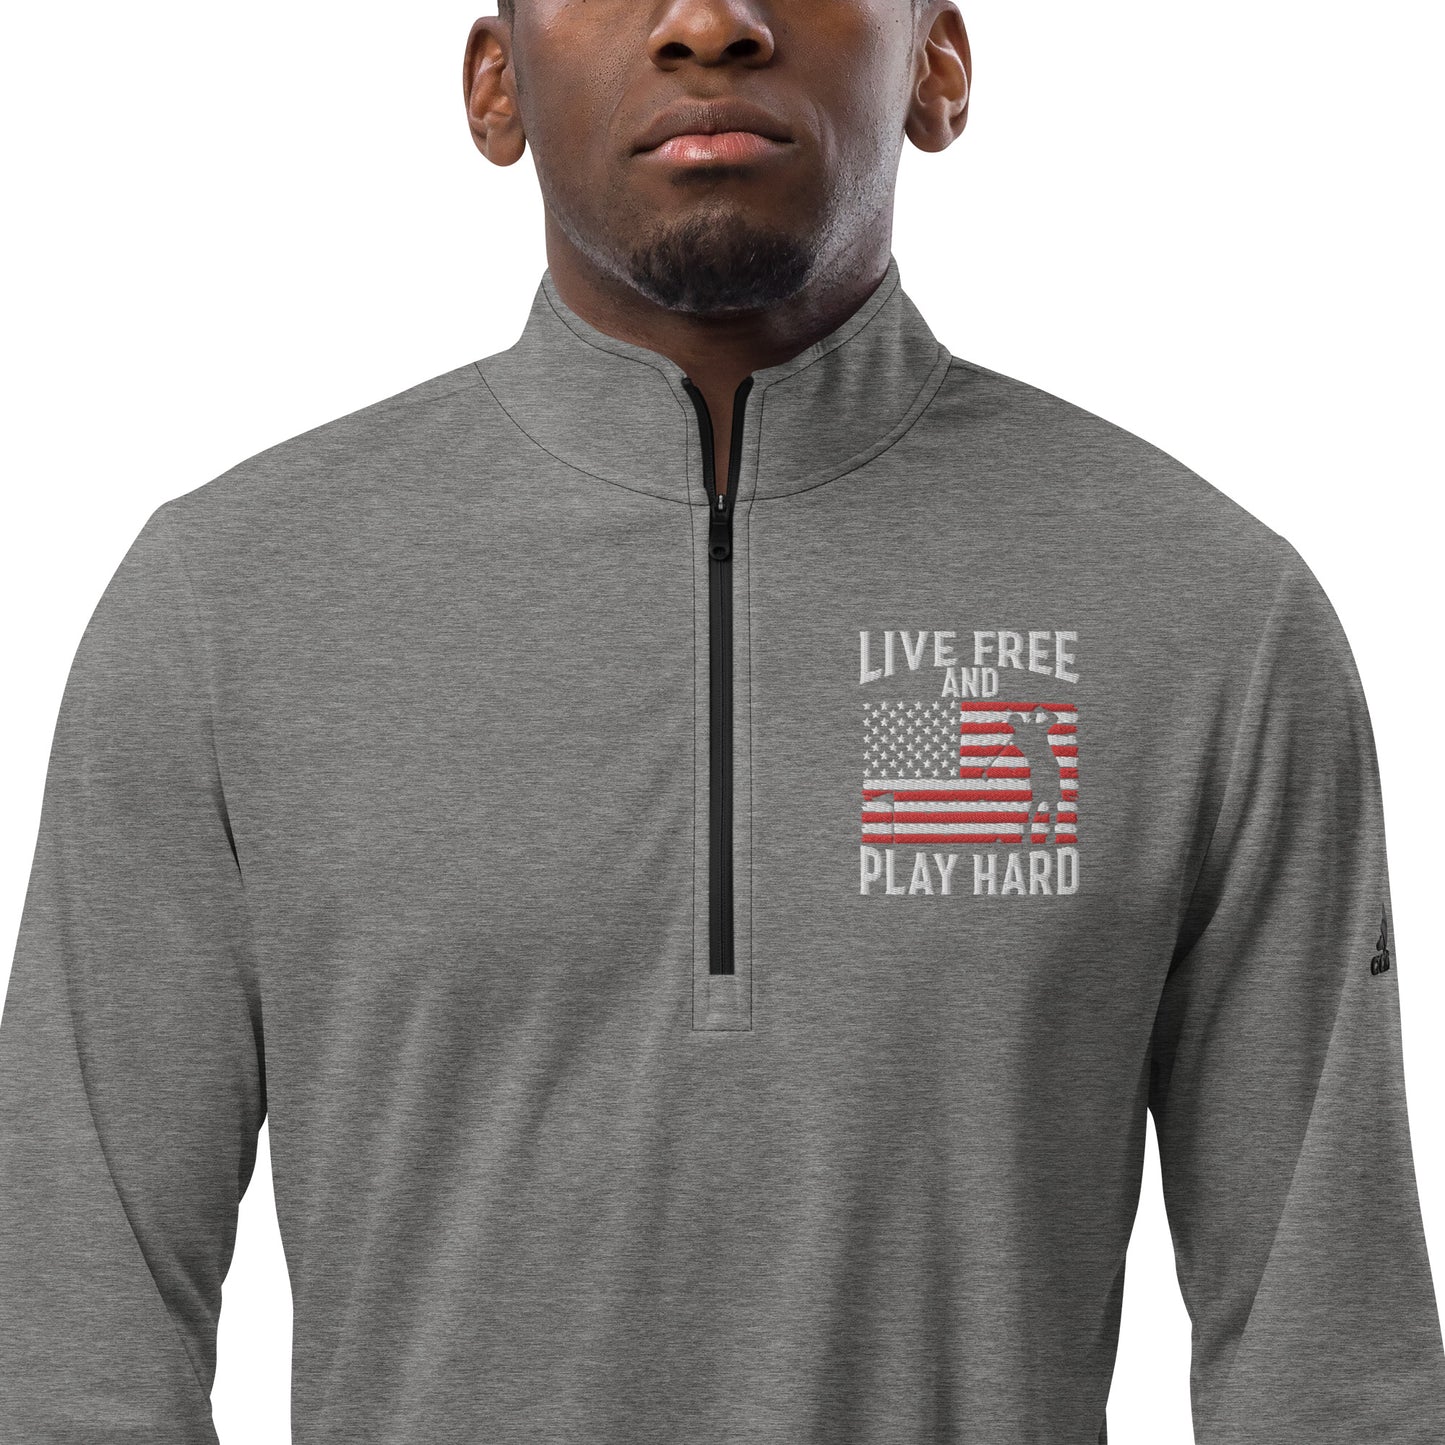 Adidas 'Live Free and Play Hard' 1/4 Zip Golf Pullover